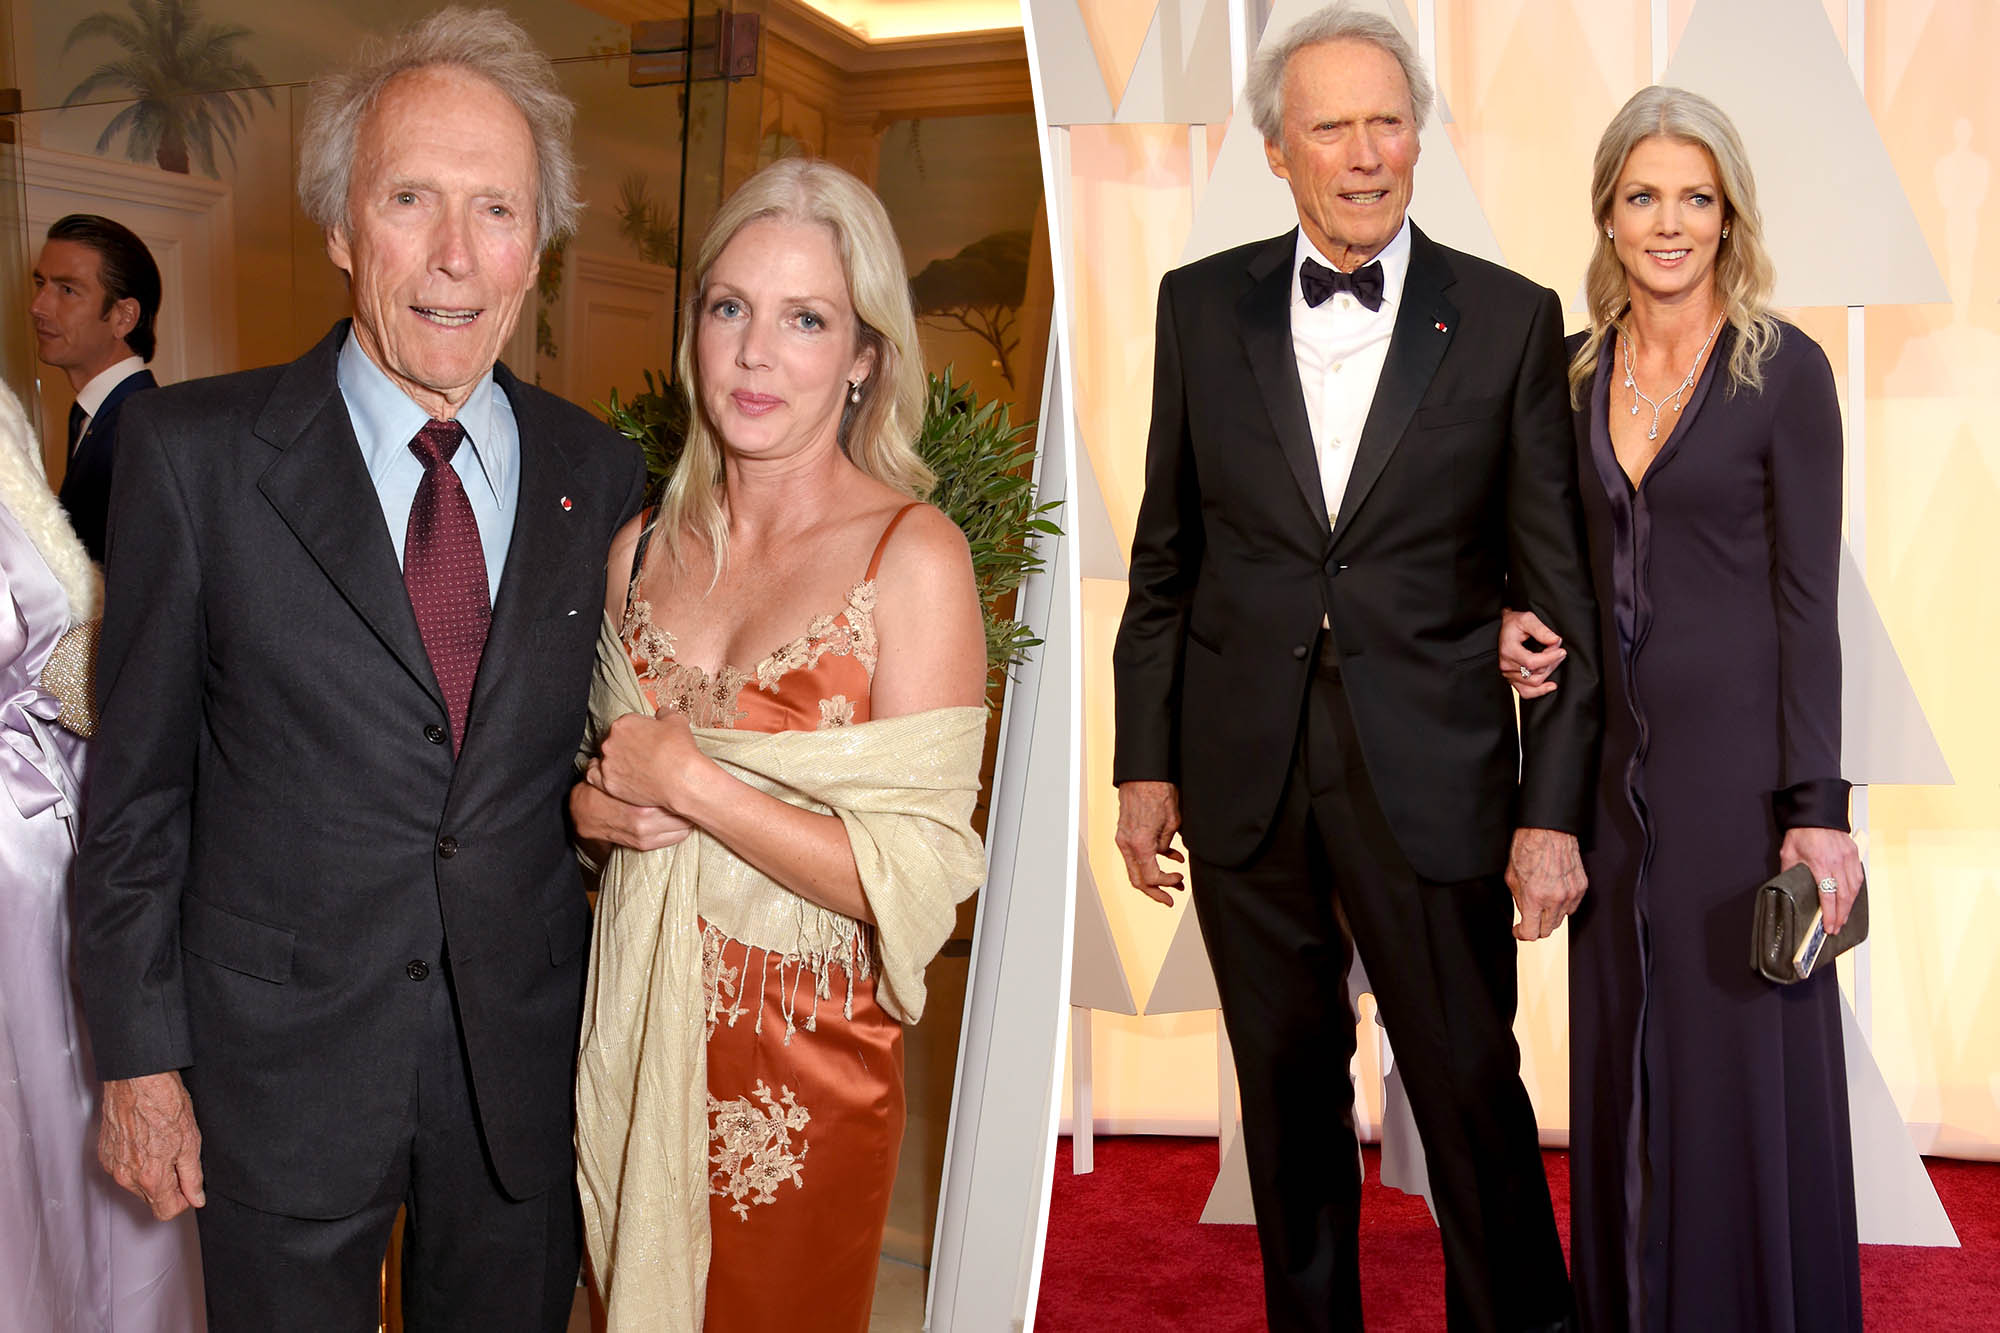 Clint Eastwood’s longtime partner Christina Sandera dead at 61: ‘I will miss her very much’